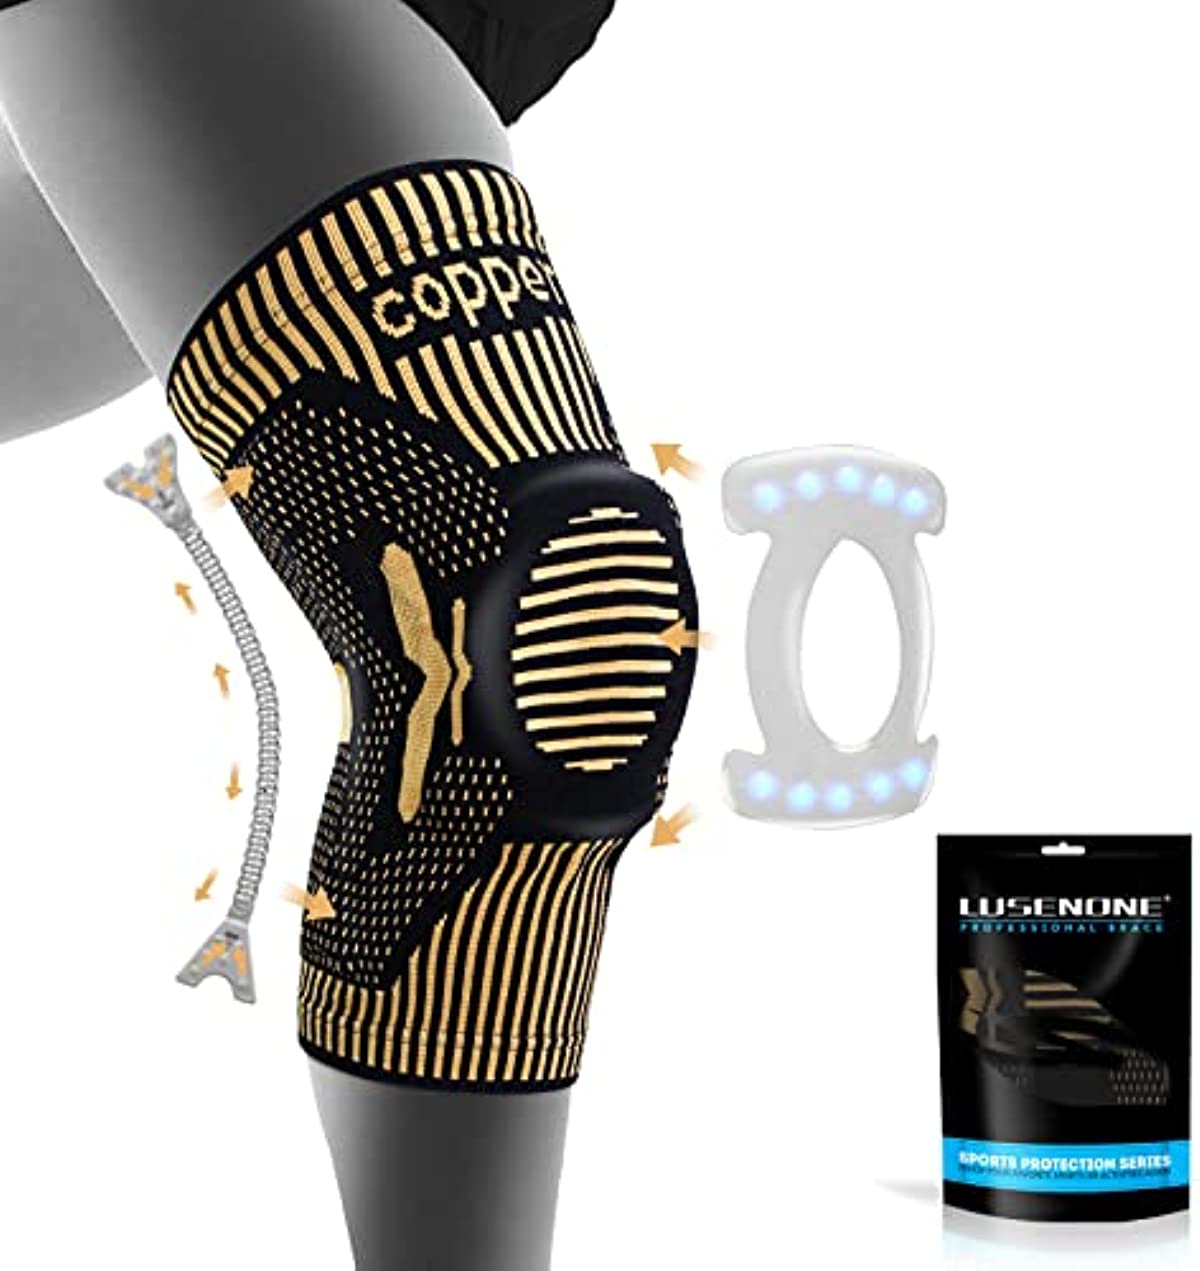 Professional Copper Knee Brace(New Version) - Knee Compression Sleeve Support for Men Women with Patella Gel Pad & Side Stabilizers, Medical Grade Knee Sleeves Knee Braces for Knee Pain,Meniscus Tear,Arthritis,Running,ACL,Workout